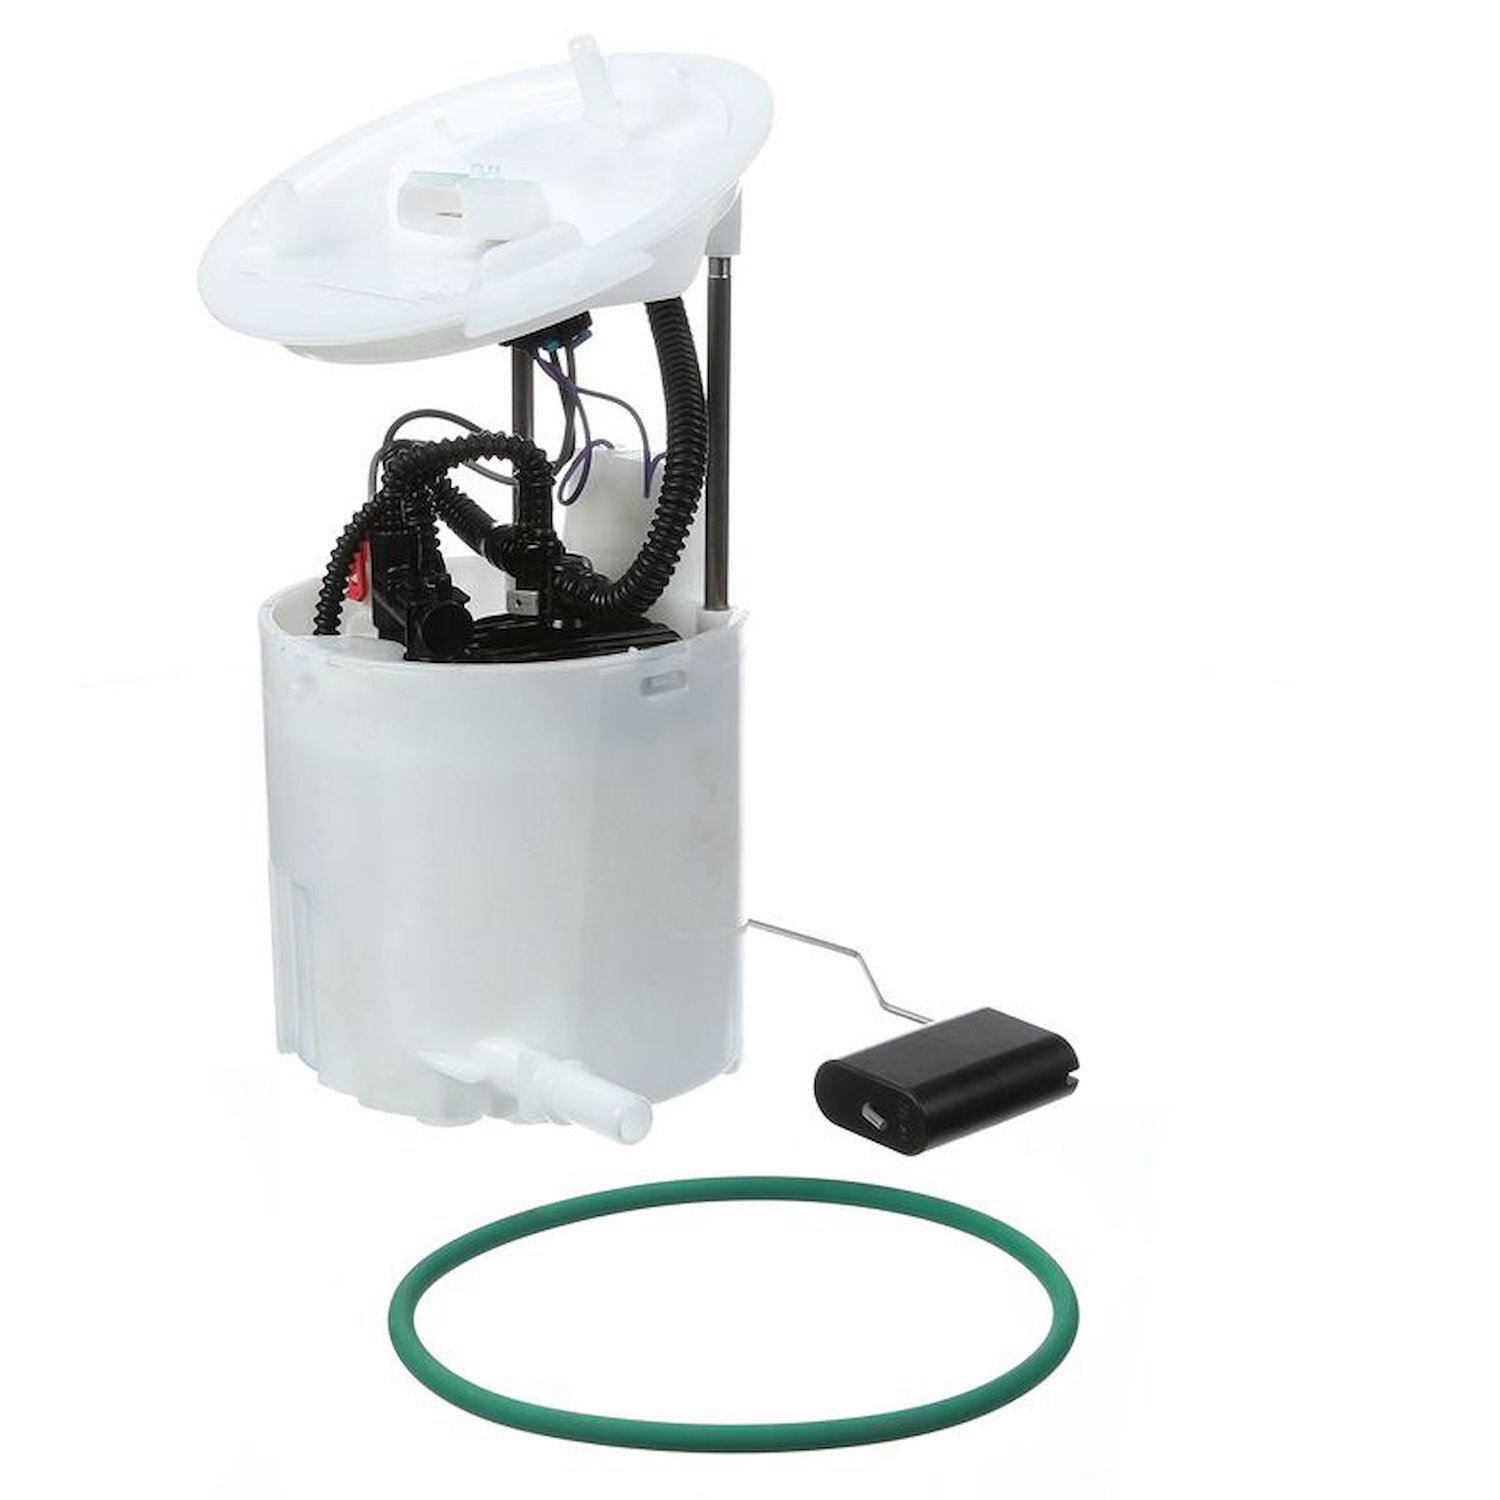 OE Ford Replacement Fuel Pump Module Assembly for 2011-2014 Ford Mustang